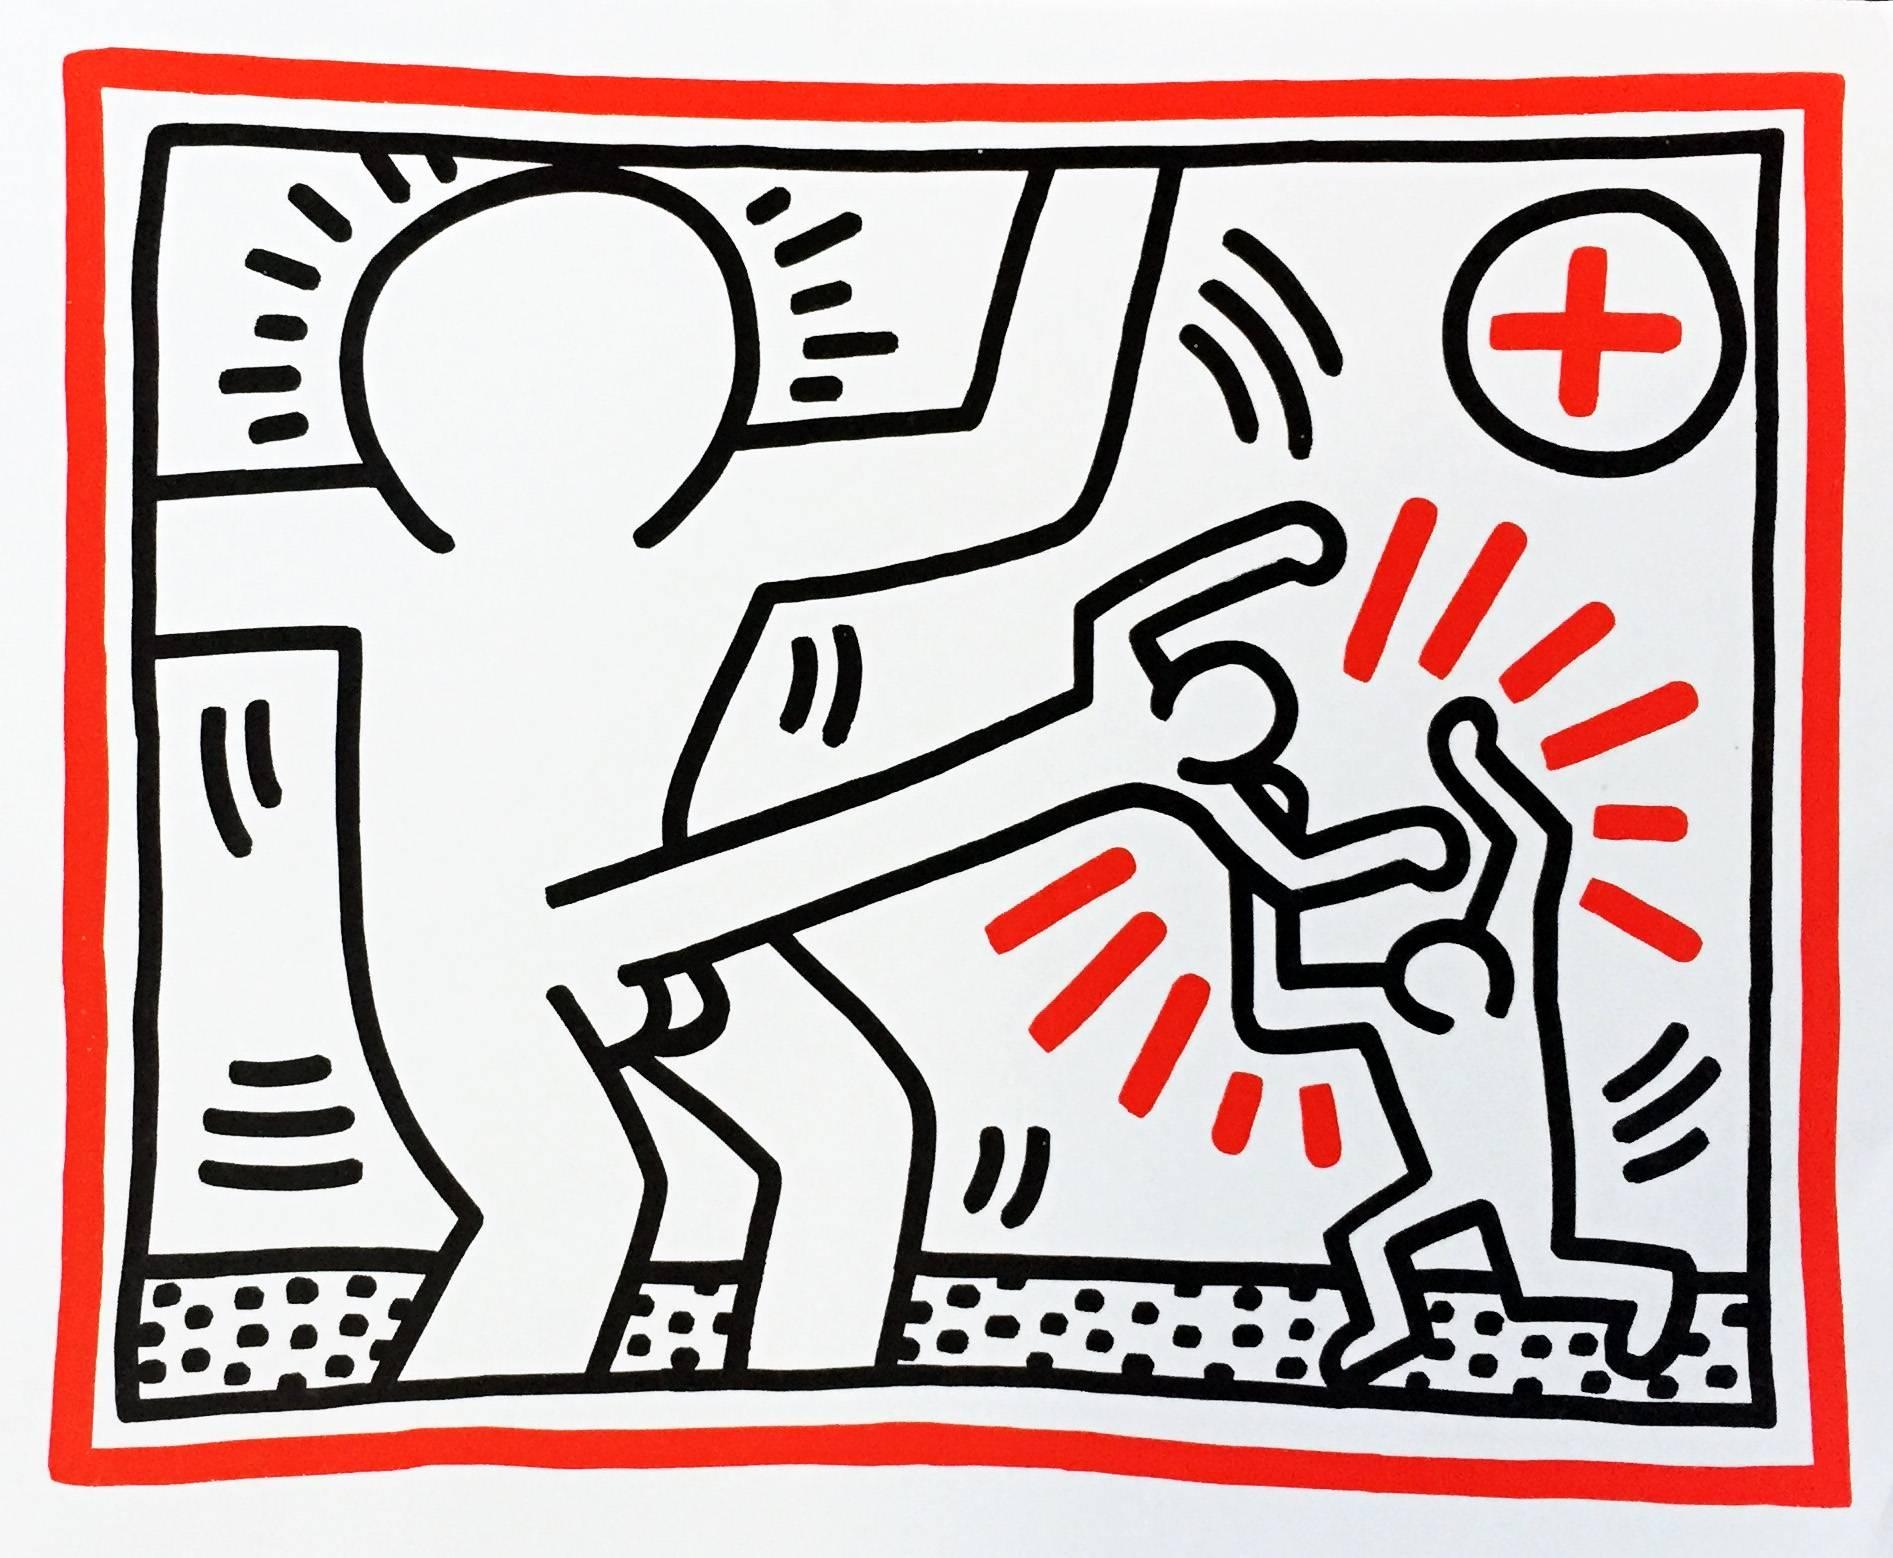 Rare Haring announcement card, Munich, Germany - Art by (after) Keith Haring